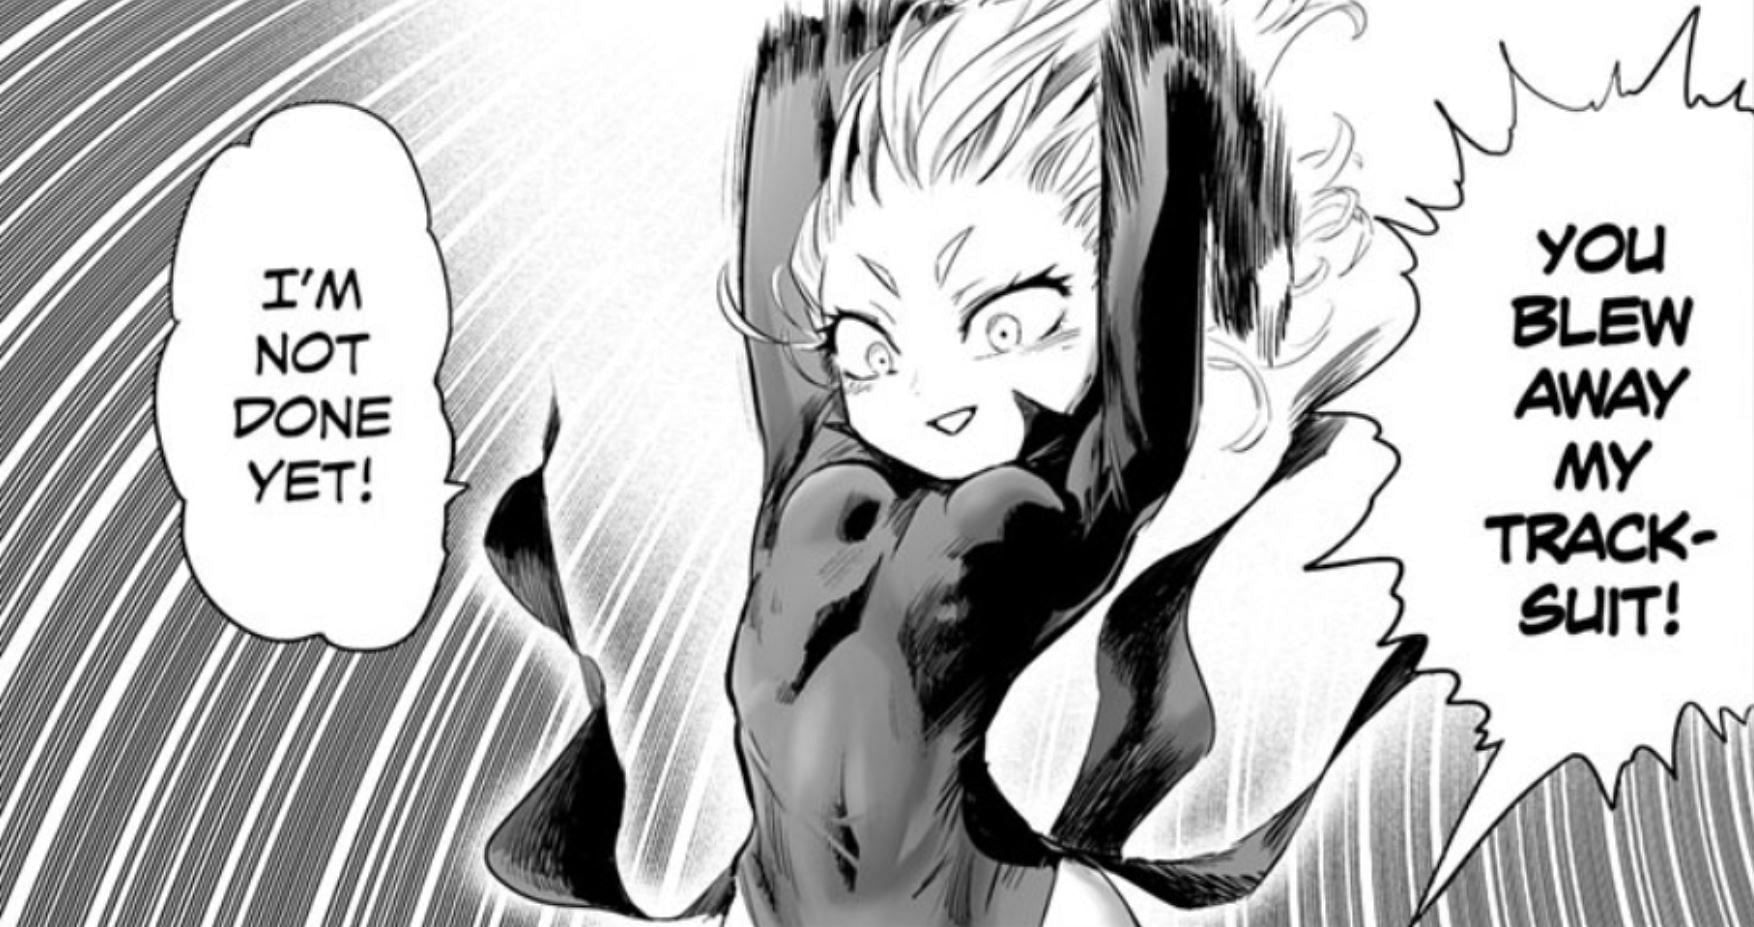 One Punch Man chapter 181: Expected release date, what to expect, and more